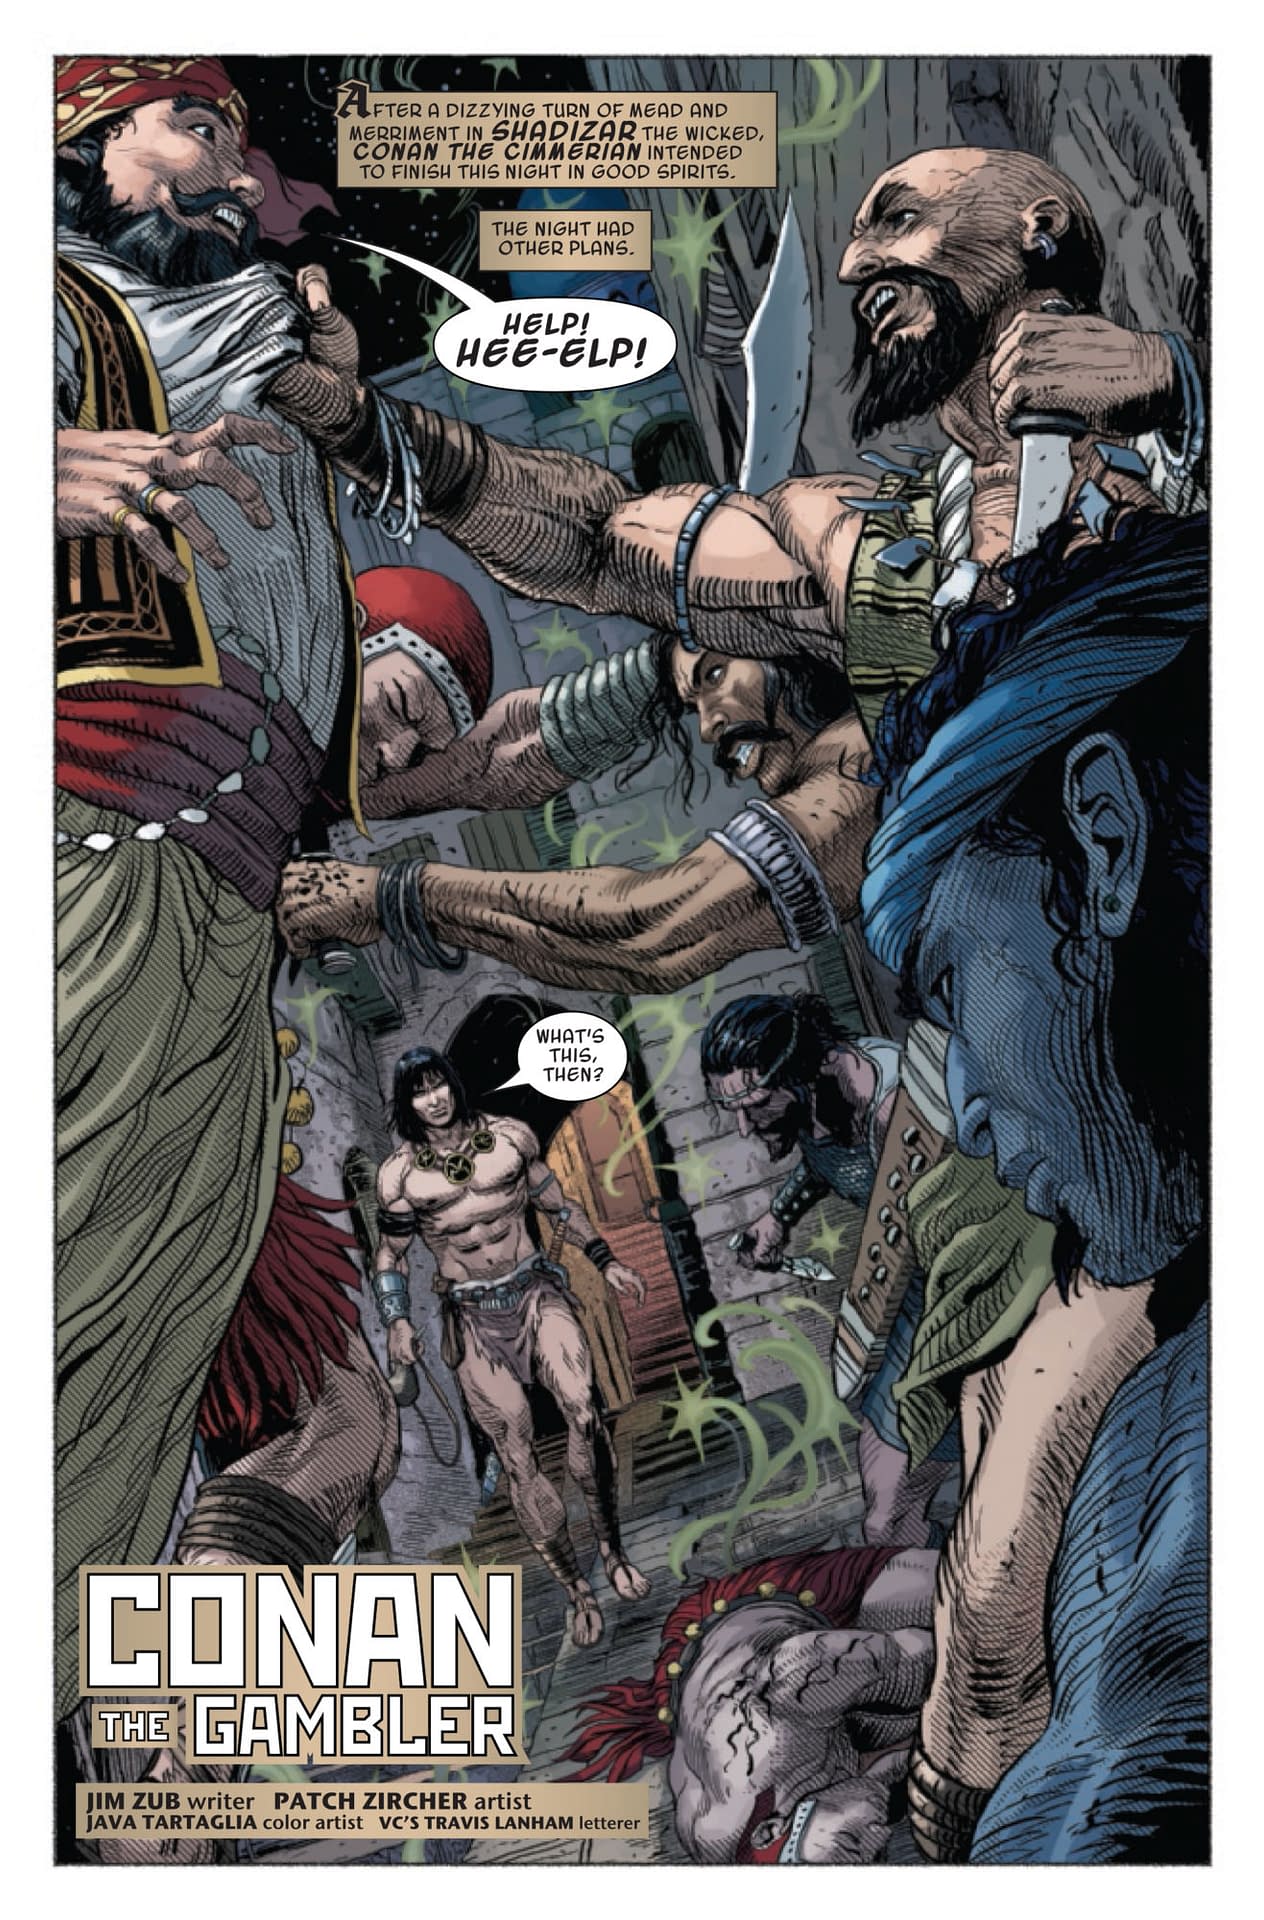 Savage Sword of Conan #7: Shadizarian Wealth Inequality [Preview]